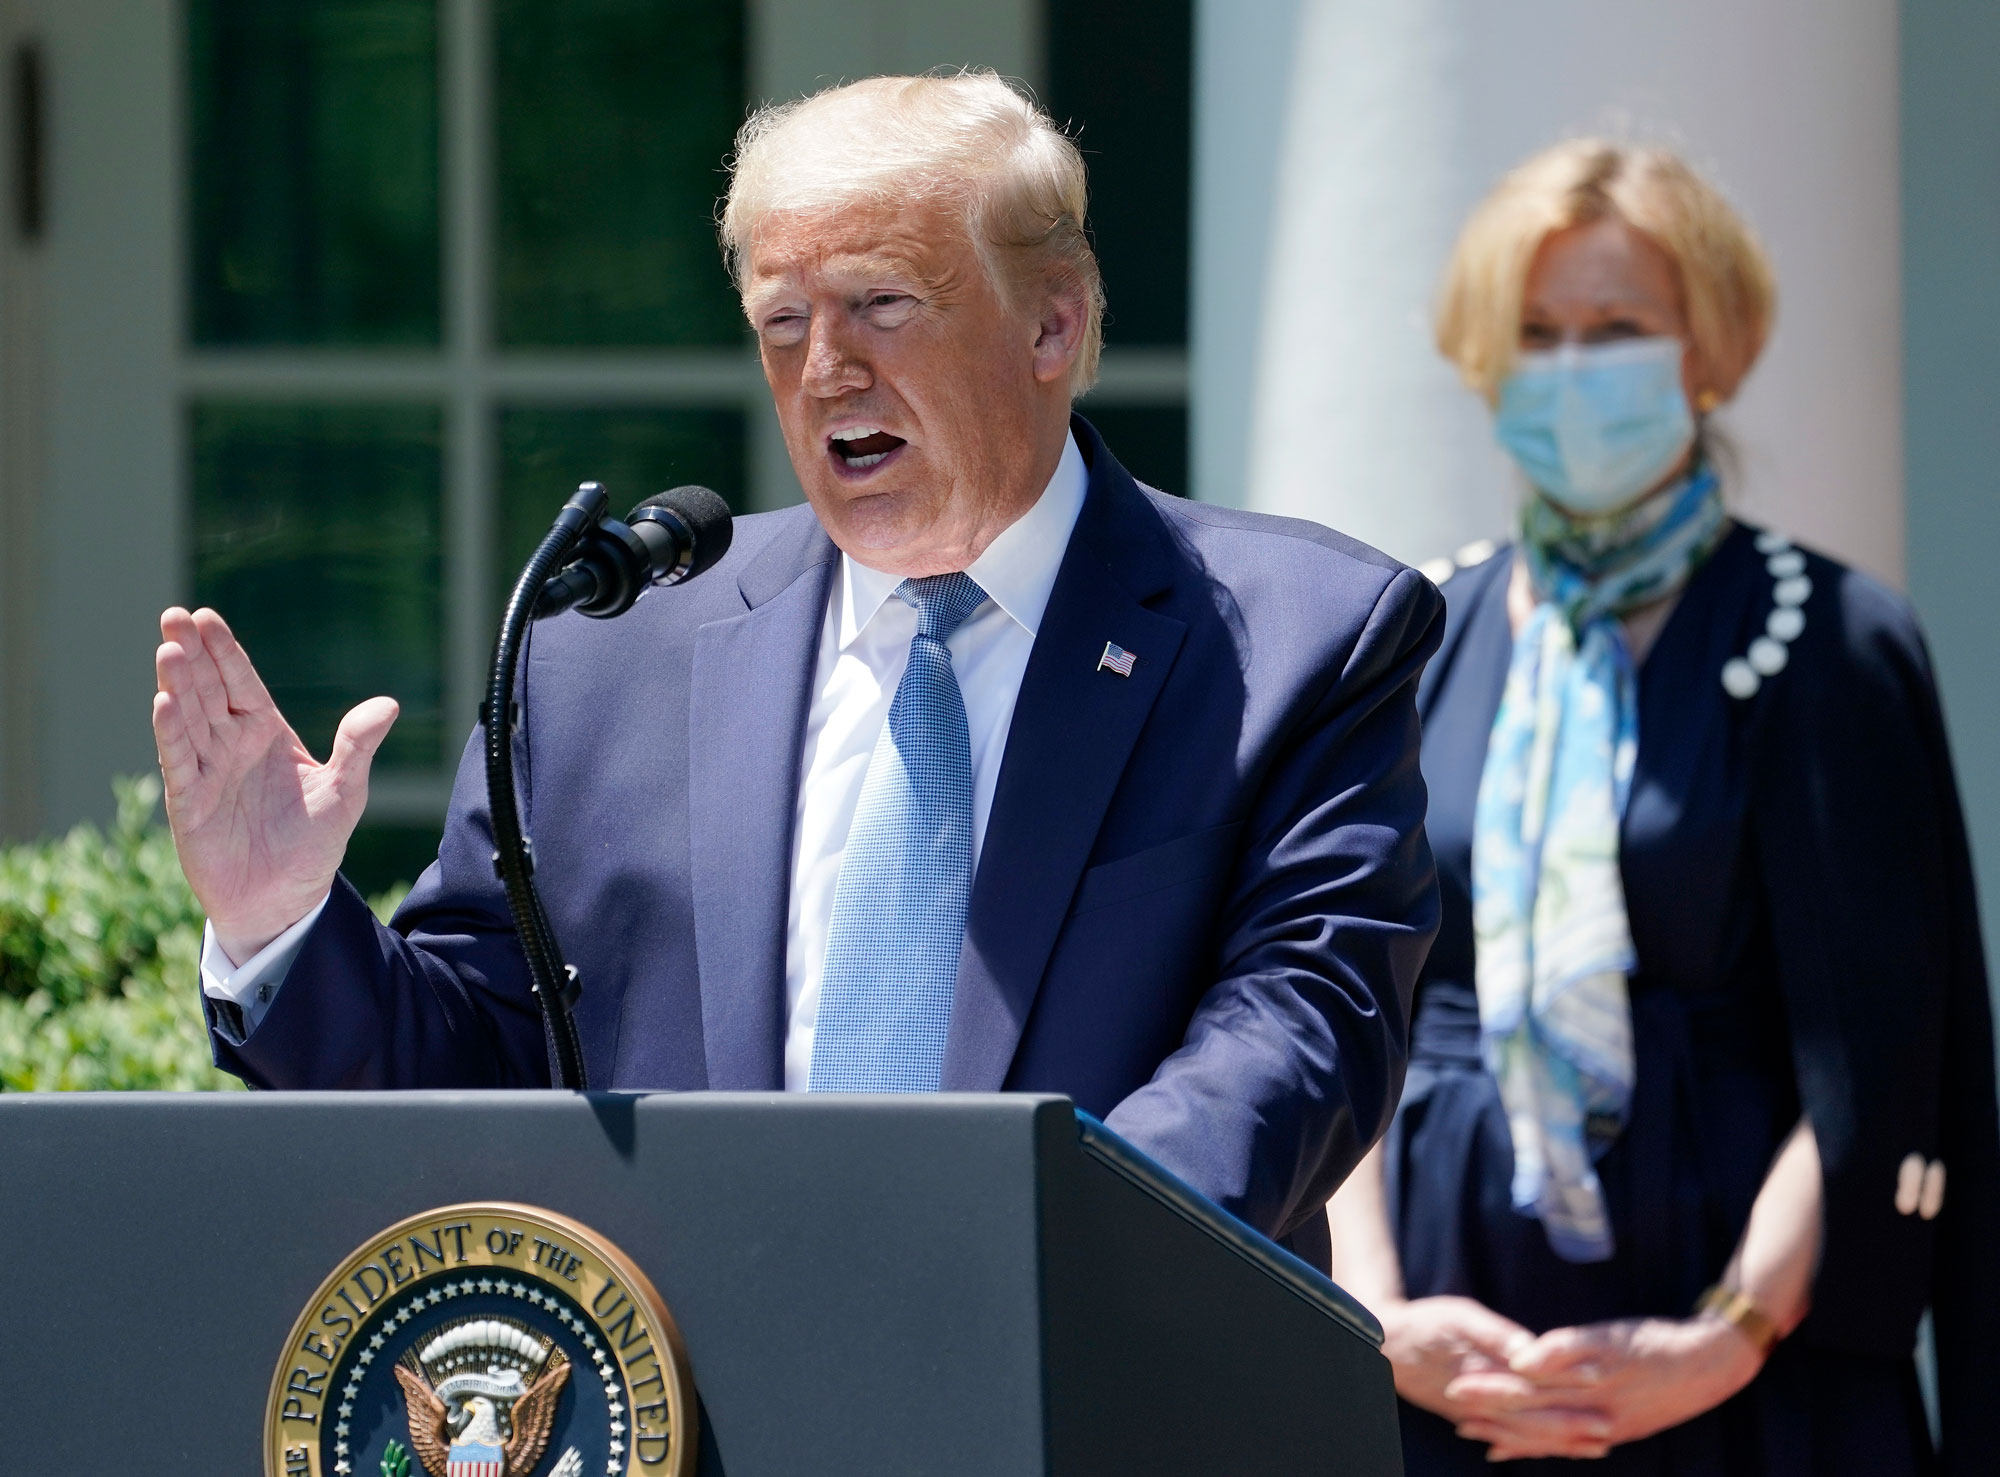 U.S. President Donald Trump speaks about coronavirus vaccine development in the Rose Garden of the White House on May 15 in Washington.